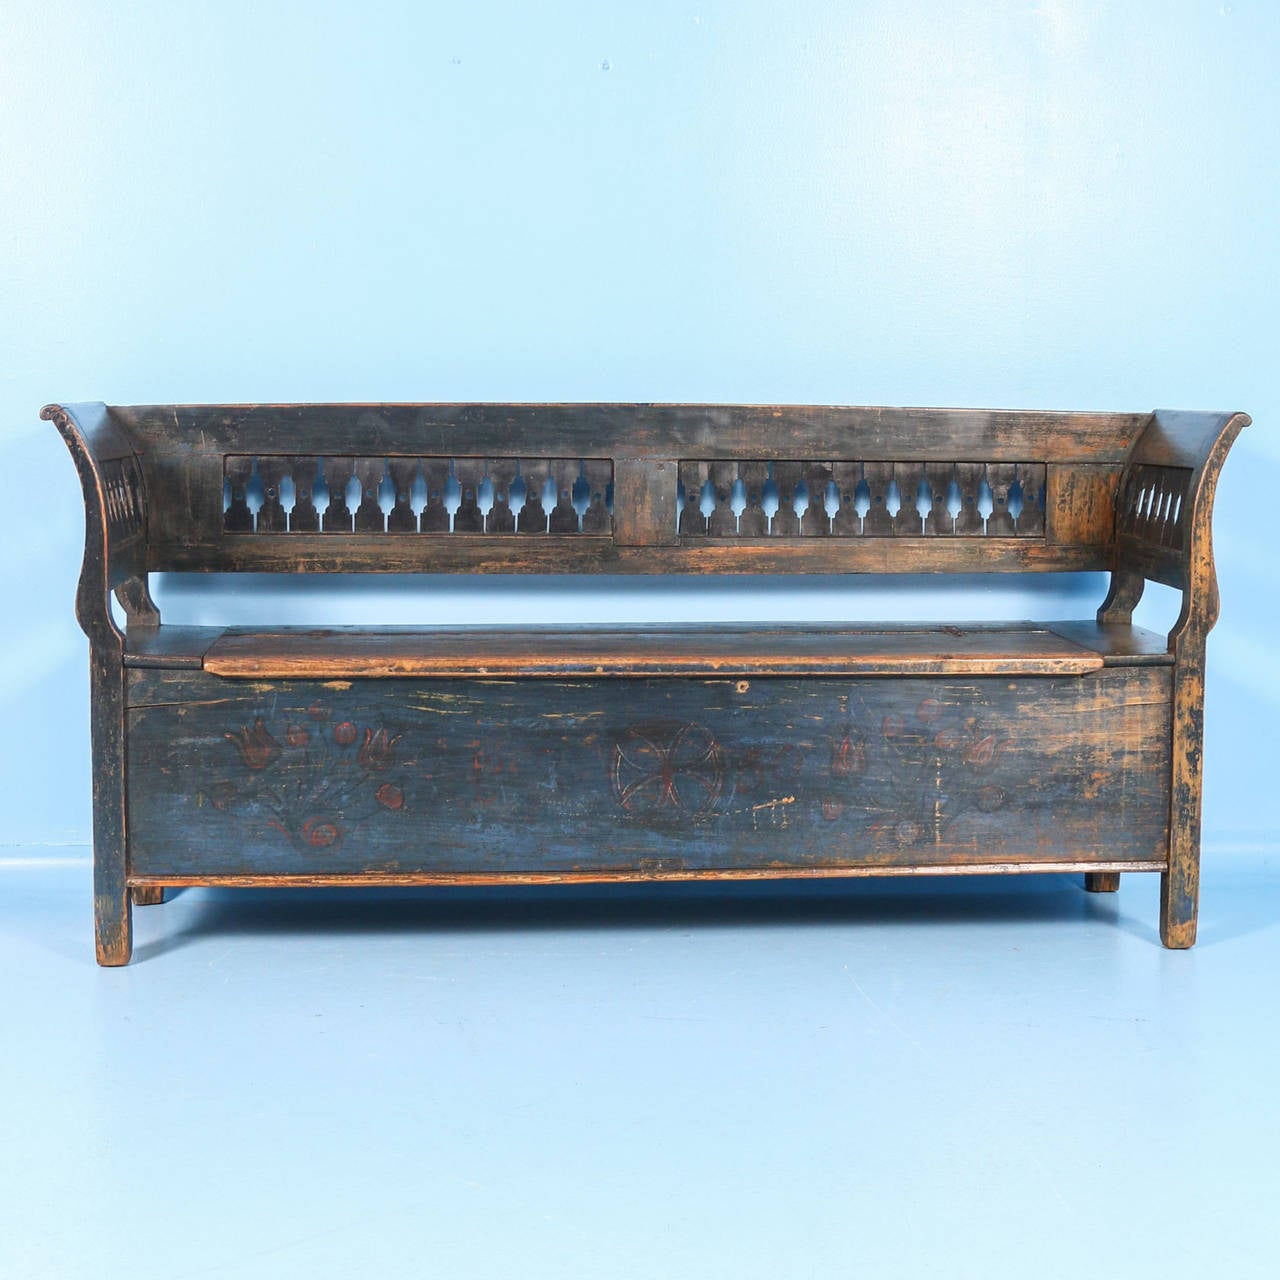 The bench still maintains its dark blue painted finish, gently worn and distressed reflecting the many years of use. On the front, you can still see the red painted tulips/flowers which were a traditional folk art motif during the 1800s. The date of